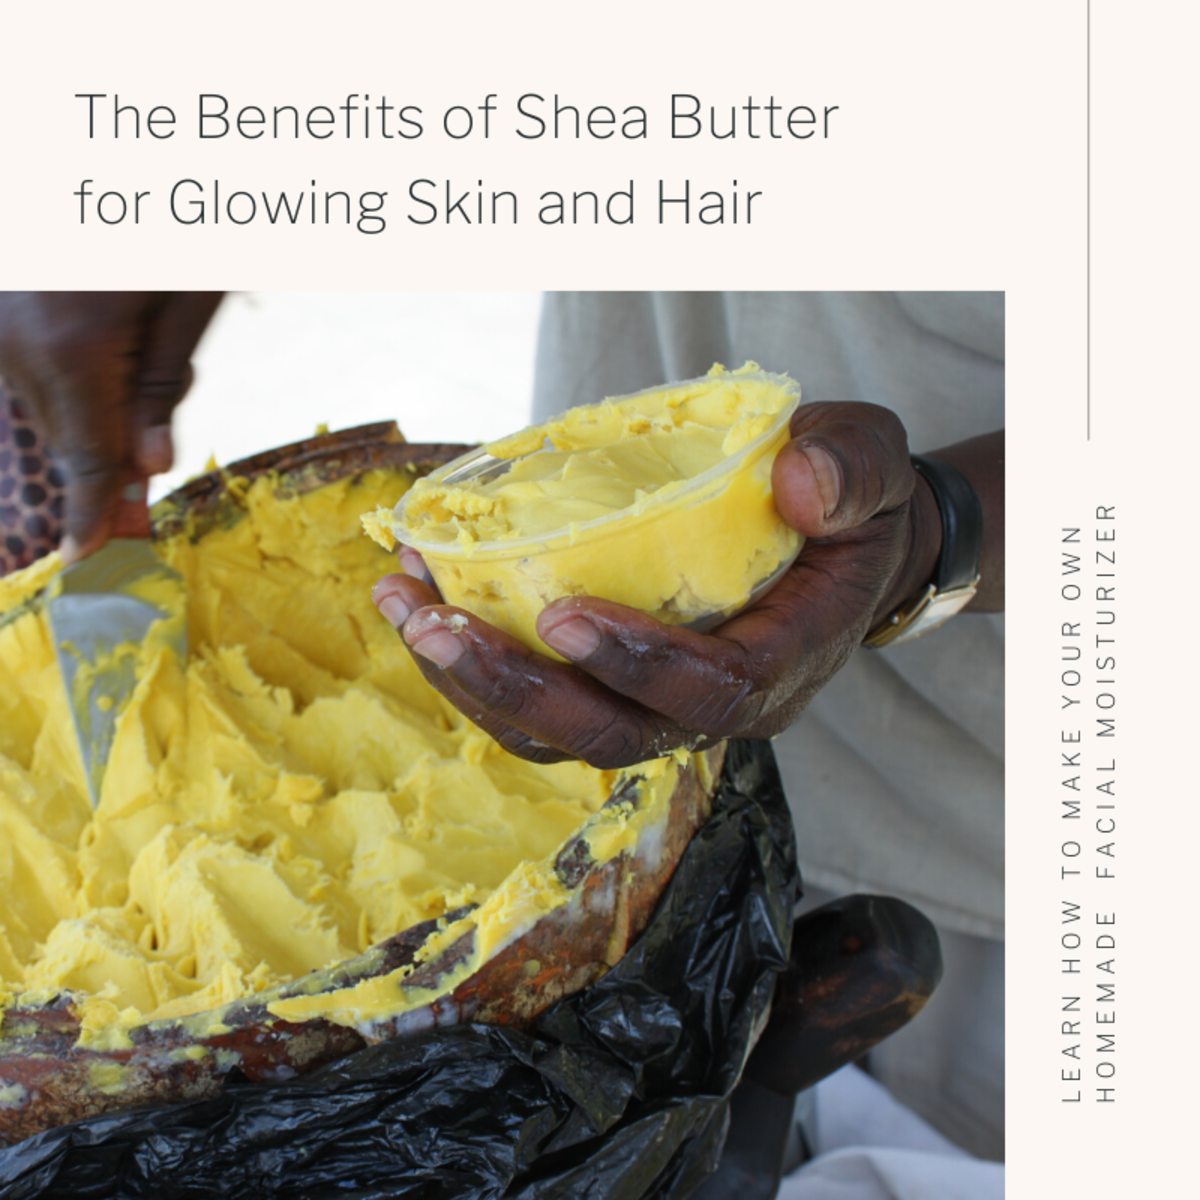 This article will break down shea butter's many benefits for your skin and hair and will also provide a recipe for a homemade shea butter facial moisturizer.